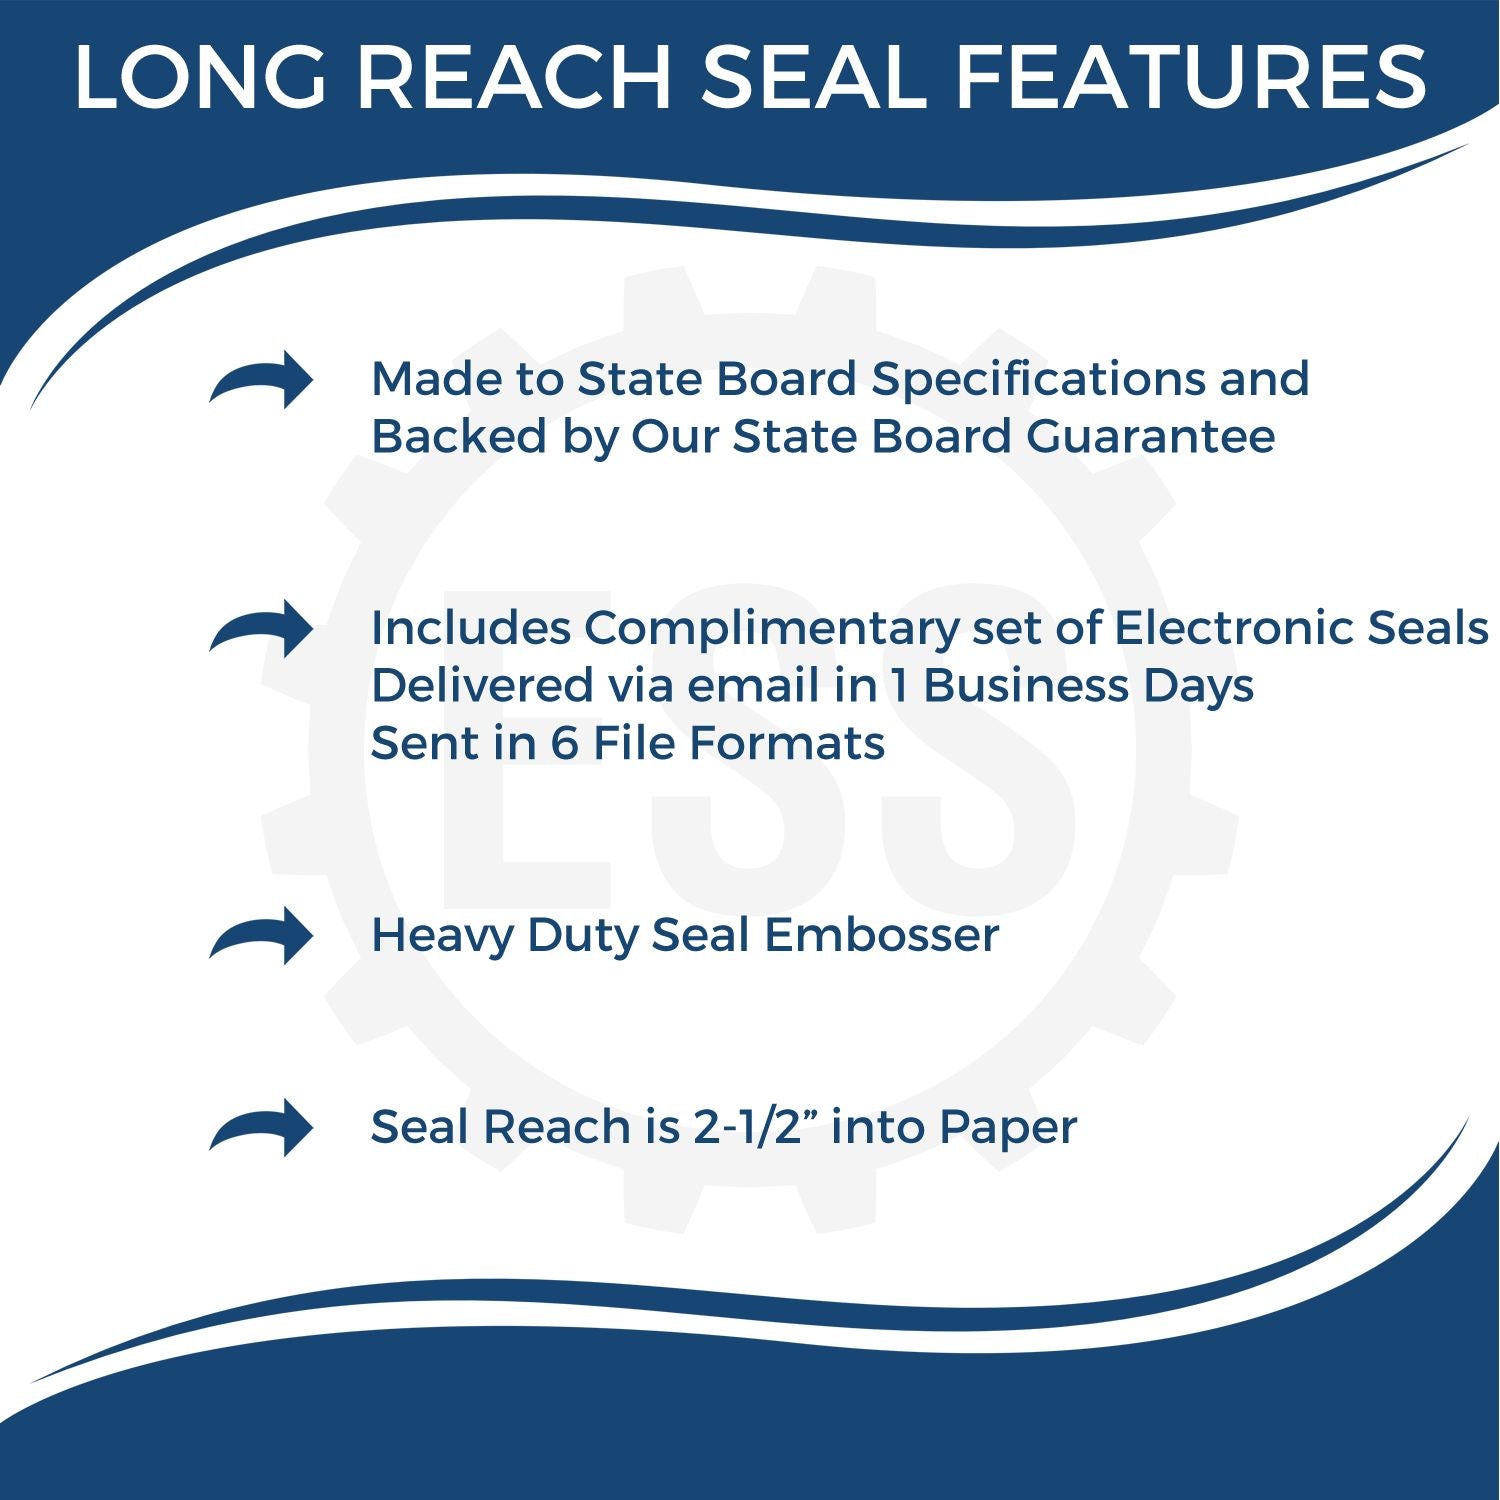 A picture of an infographic highlighting the selling points for the Long Reach Puerto Rico PE Seal